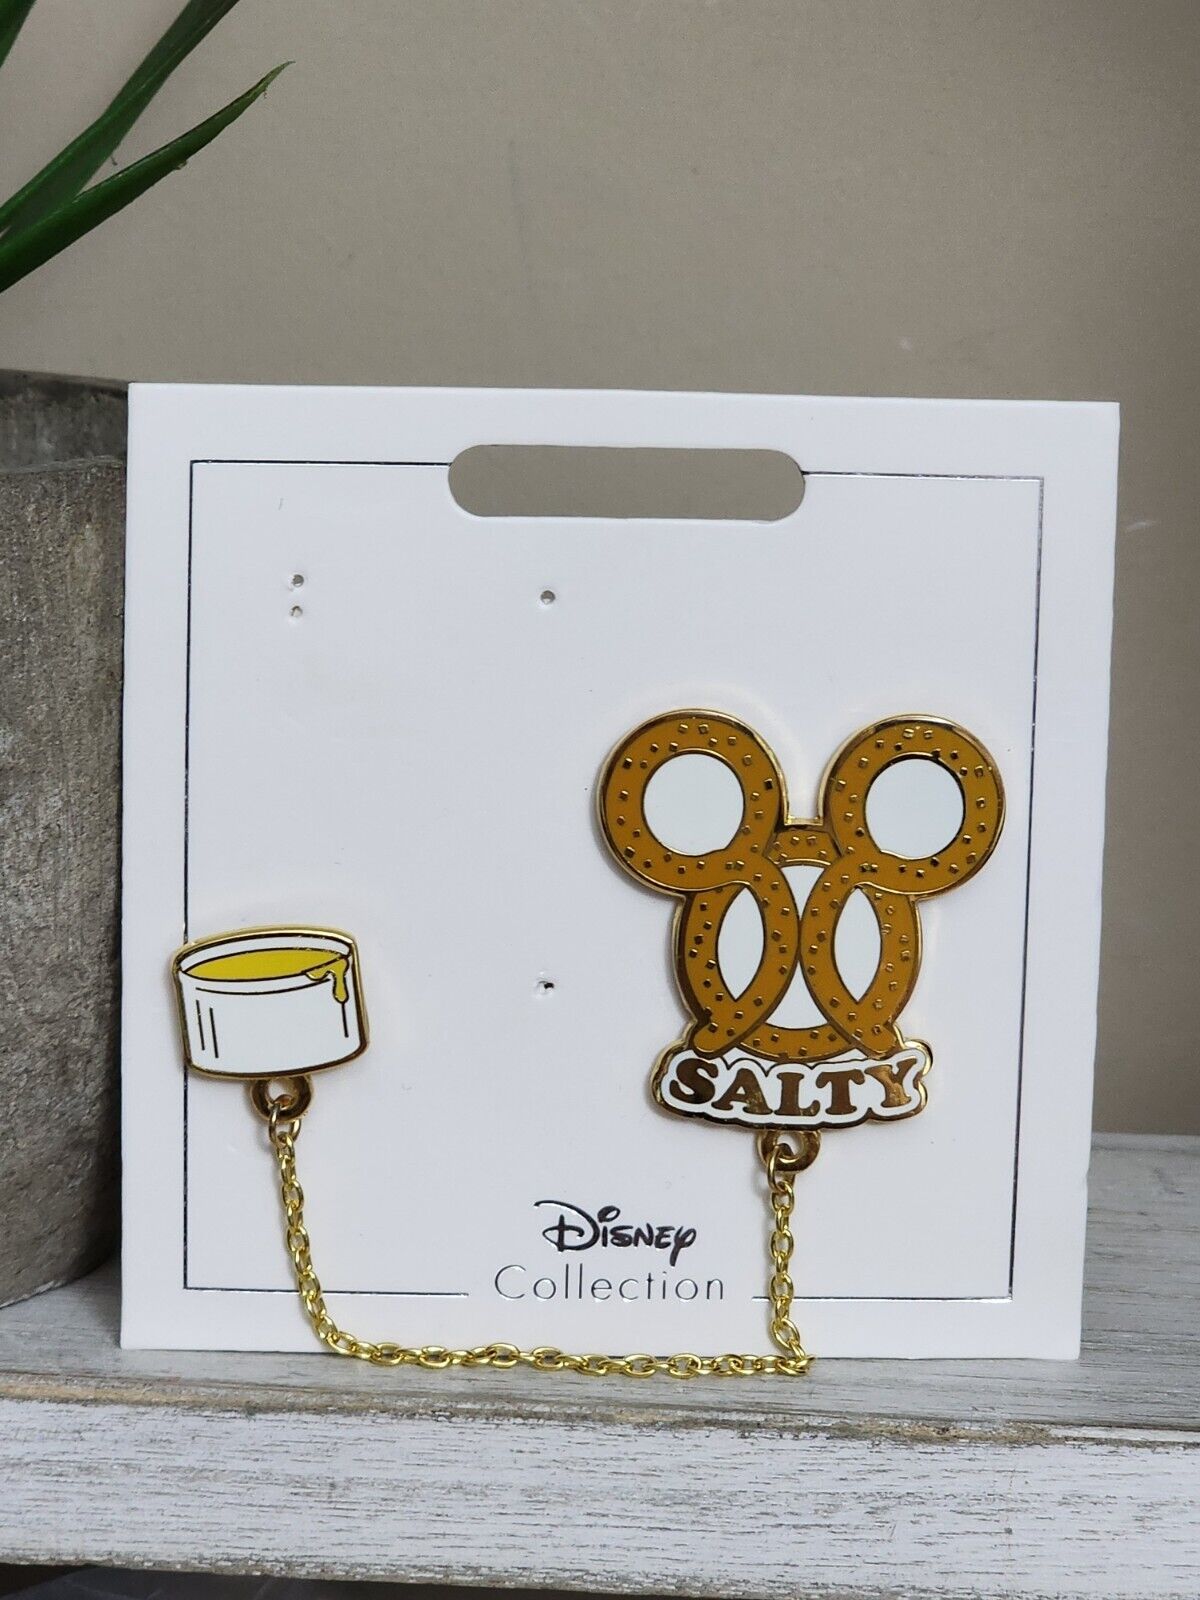 Disney Mickey Mouse Salty Pretzel and Cheese Treats Pin